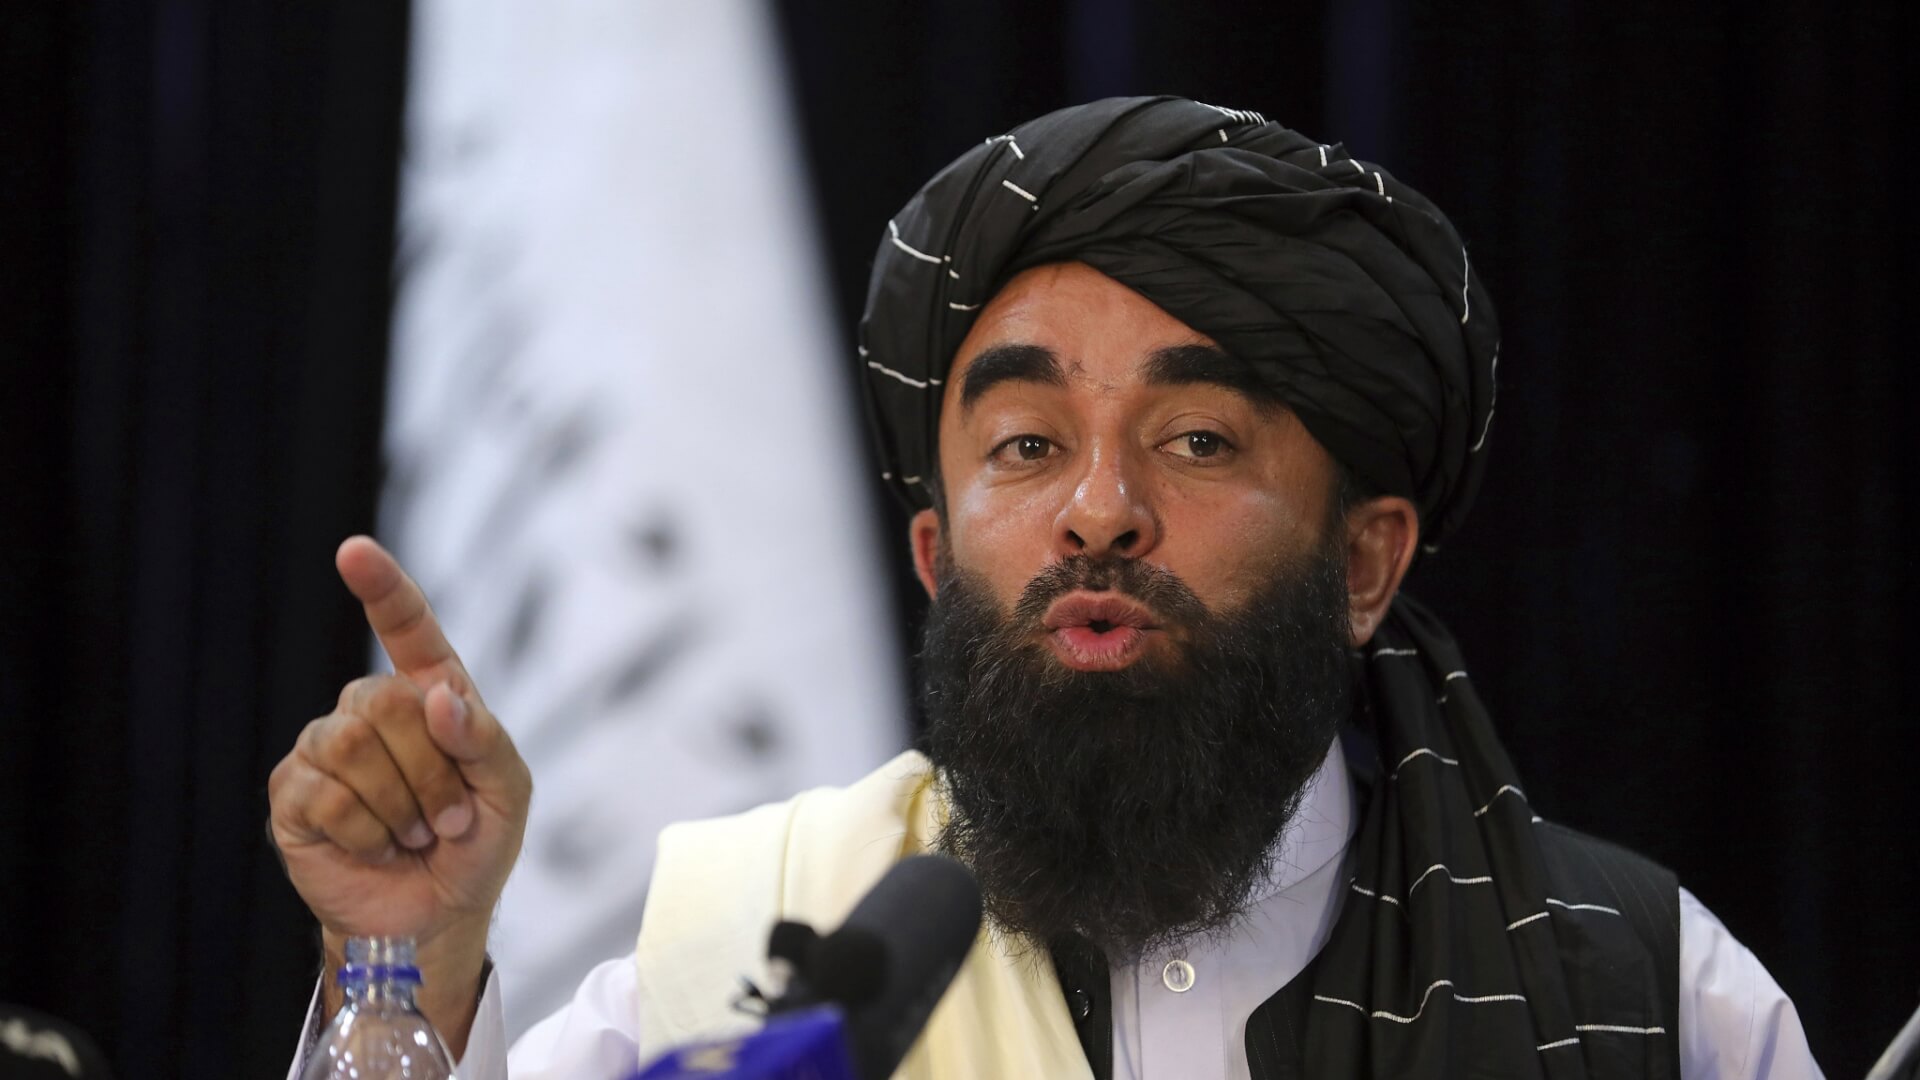 Afghanistan ‘Peaceful’, Women Face ‘No Threat’, Says Taliban in Dismissal of UN Report